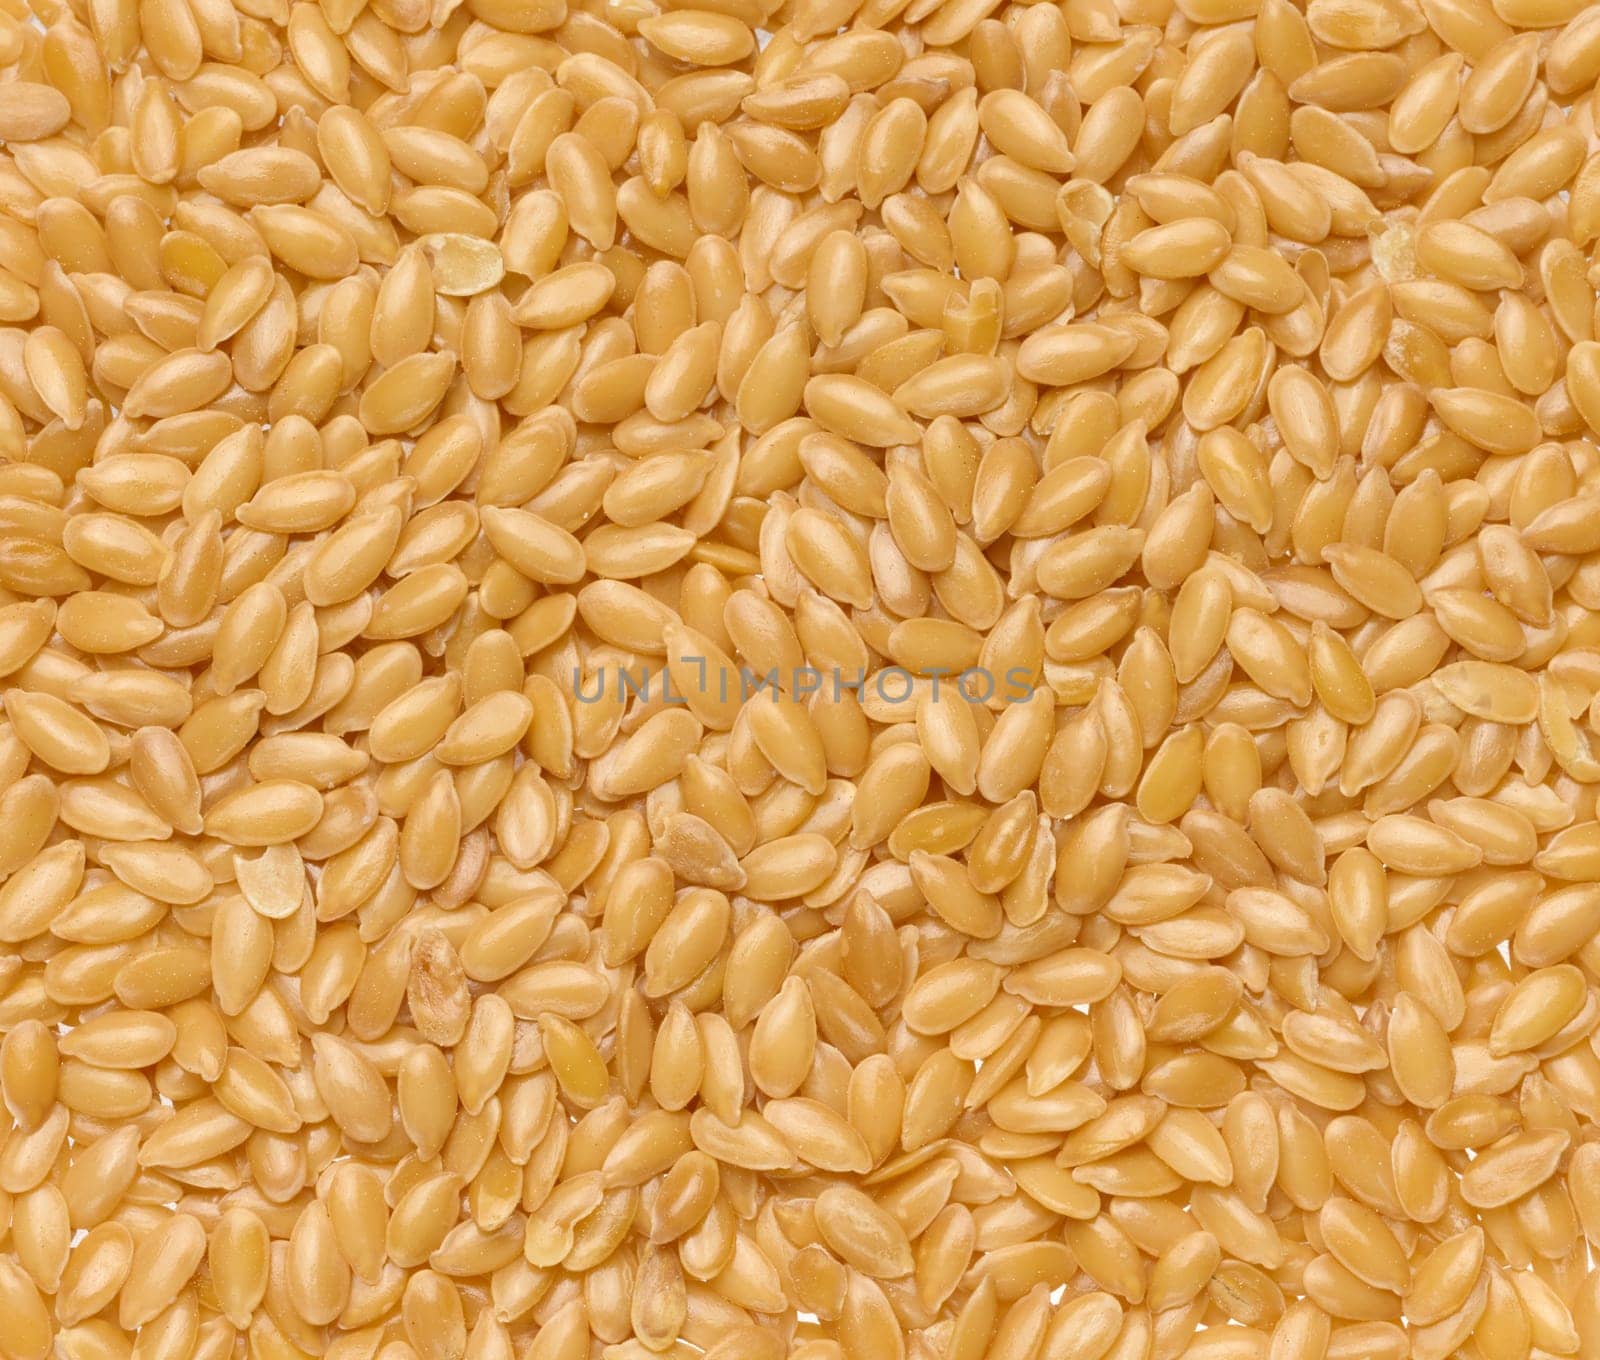 Texture of flax seeds, top view. Full frame